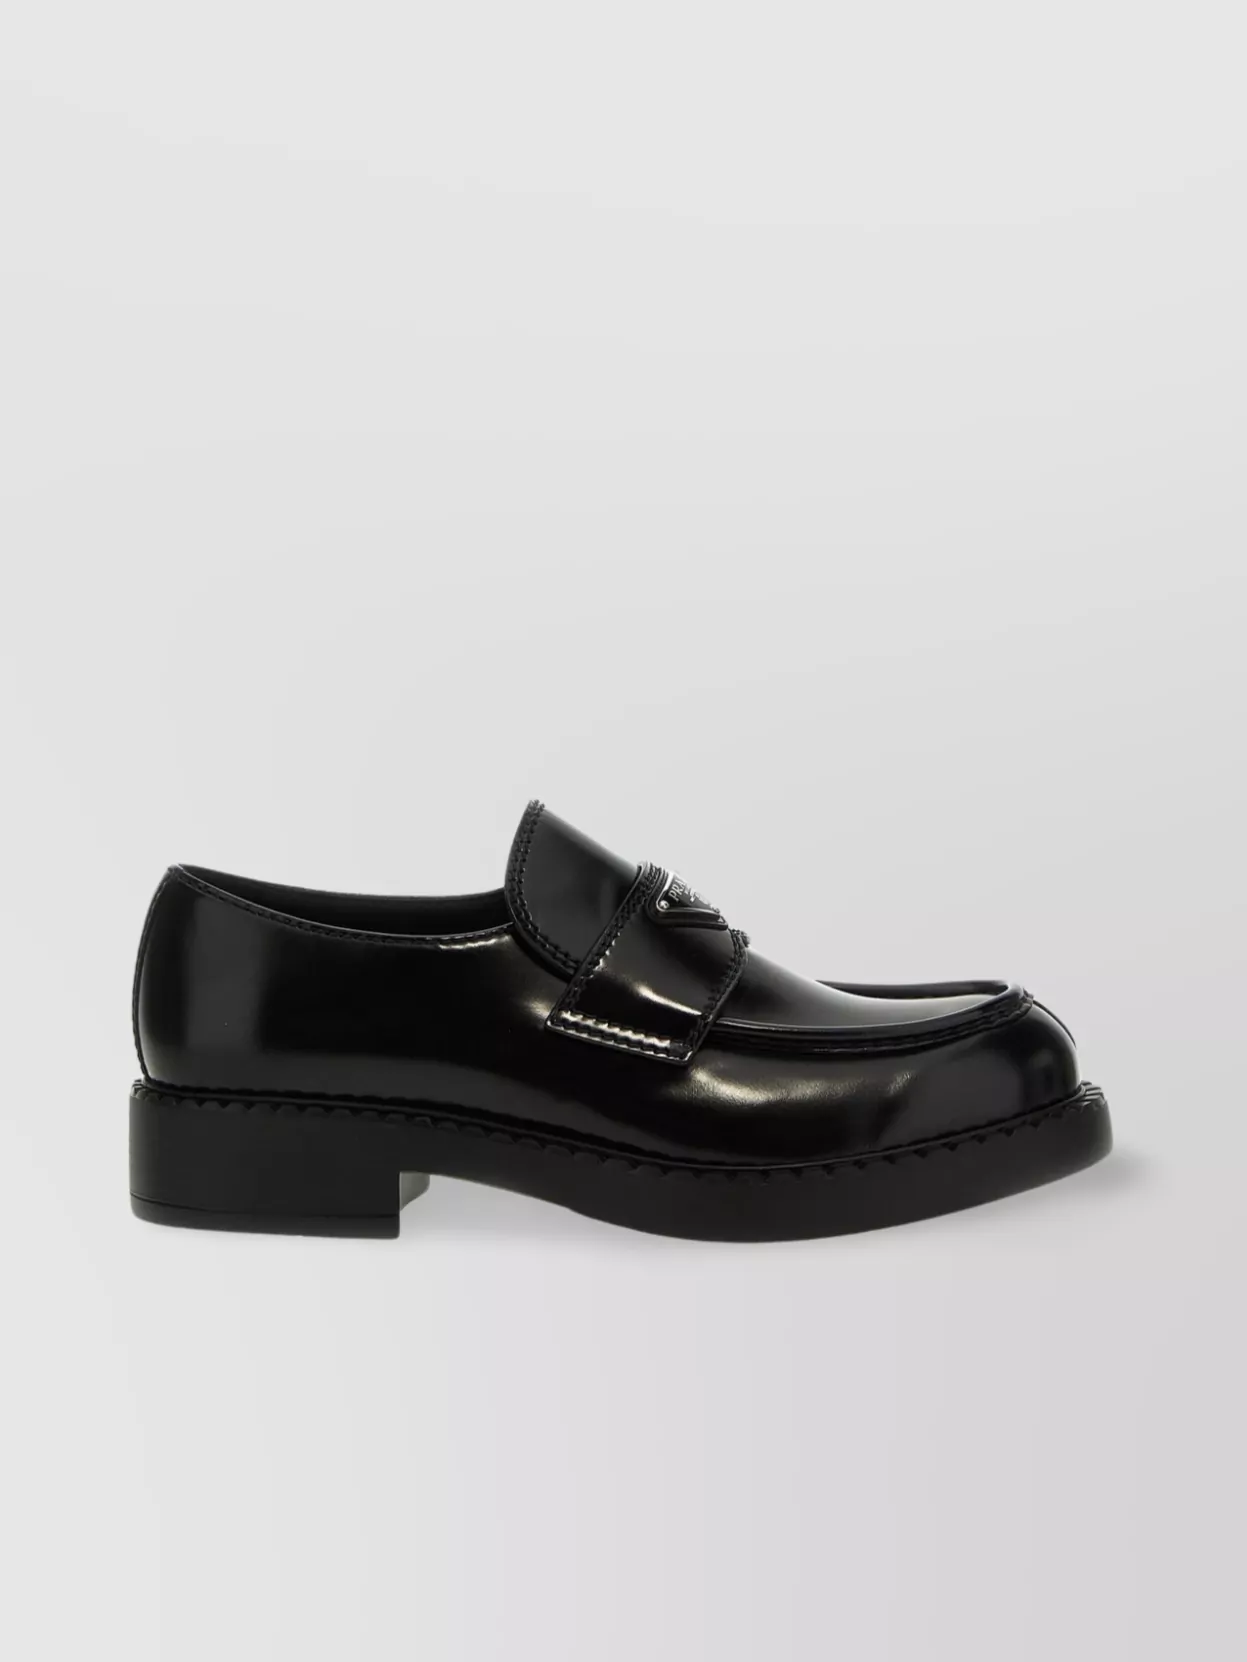 Prada Loafers Round Toe Stitched Detailing